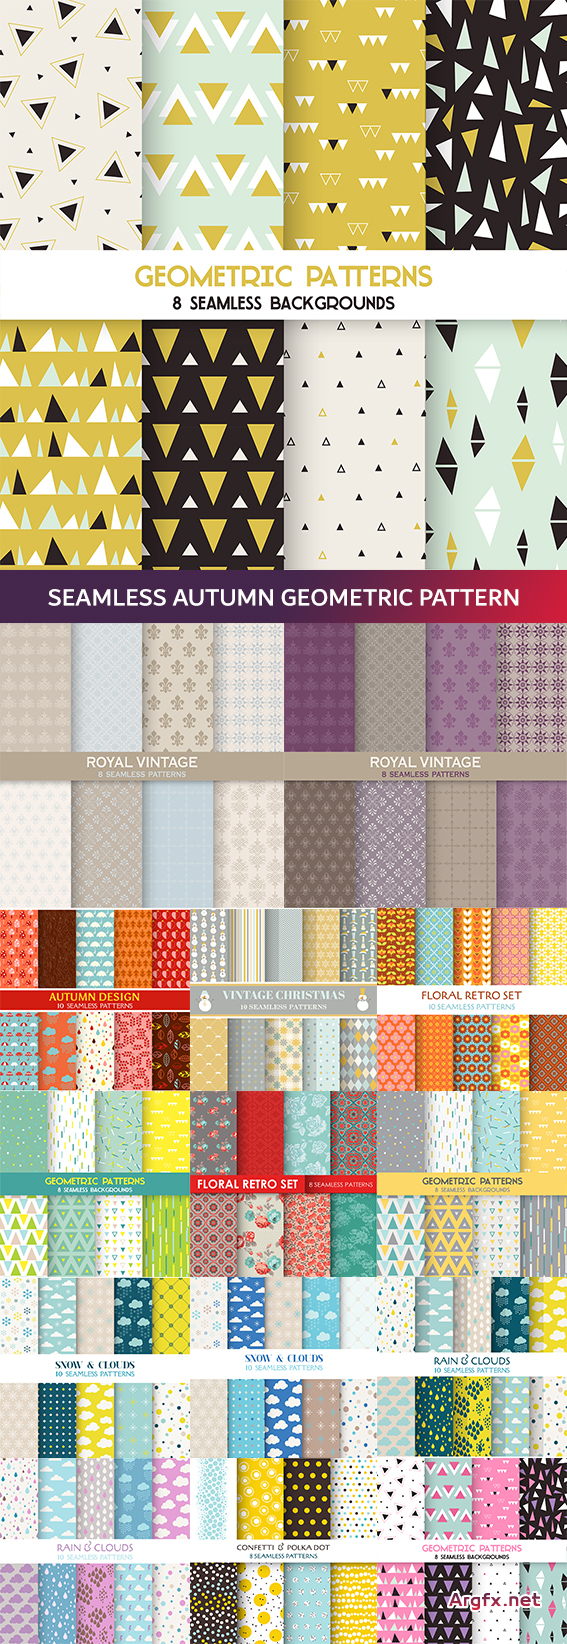 Seamless autumn geometric pattern with flower sky triangles 15 EPS